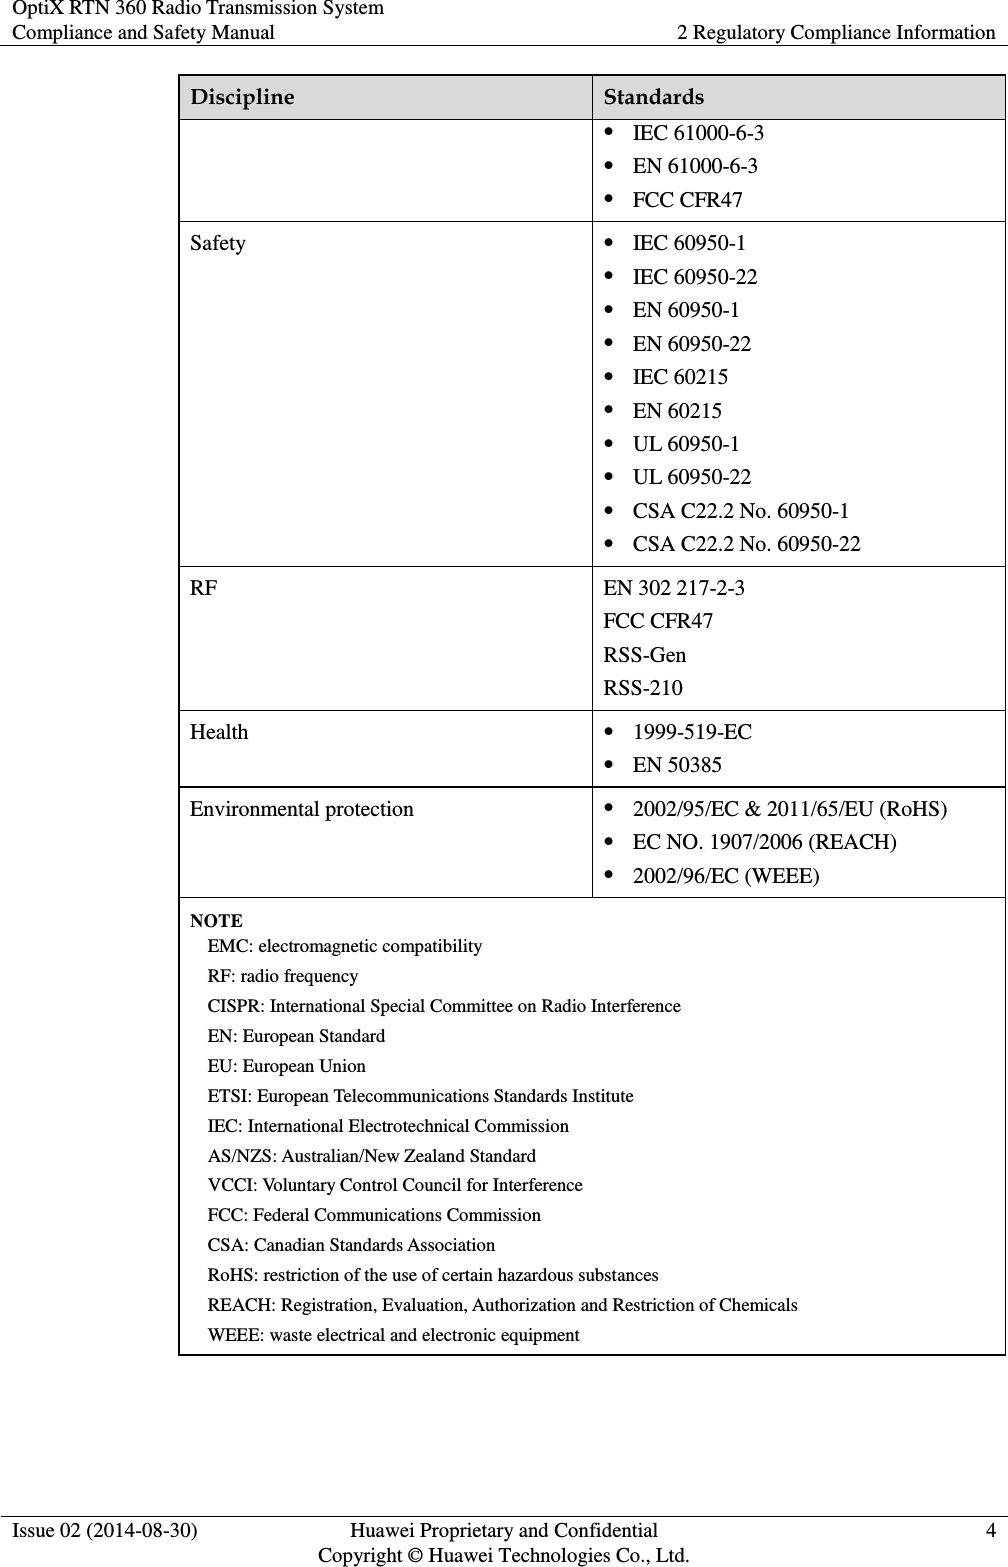 OptiX RTN 360 Radio Transmission System Compliance and Safety Manual 2 Regulatory Compliance Information  Issue 02 (2014-08-30) Huawei Proprietary and Confidential                                     Copyright © Huawei Technologies Co., Ltd. 4  Discipline Standards  IEC 61000-6-3  EN 61000-6-3  FCC CFR47 Safety  IEC 60950-1  IEC 60950-22  EN 60950-1  EN 60950-22  IEC 60215  EN 60215  UL 60950-1  UL 60950-22  CSA C22.2 No. 60950-1  CSA C22.2 No. 60950-22 RF EN 302 217-2-3 FCC CFR47 RSS-Gen RSS-210 Health  1999-519-EC  EN 50385 Environmental protection  2002/95/EC &amp; 2011/65/EU (RoHS)  EC NO. 1907/2006 (REACH)    2002/96/EC (WEEE) NOTE EMC: electromagnetic compatibility RF: radio frequency CISPR: International Special Committee on Radio Interference EN: European Standard EU: European Union ETSI: European Telecommunications Standards Institute IEC: International Electrotechnical Commission AS/NZS: Australian/New Zealand Standard VCCI: Voluntary Control Council for Interference FCC: Federal Communications Commission CSA: Canadian Standards Association RoHS: restriction of the use of certain hazardous substances REACH: Registration, Evaluation, Authorization and Restriction of Chemicals WEEE: waste electrical and electronic equipment  